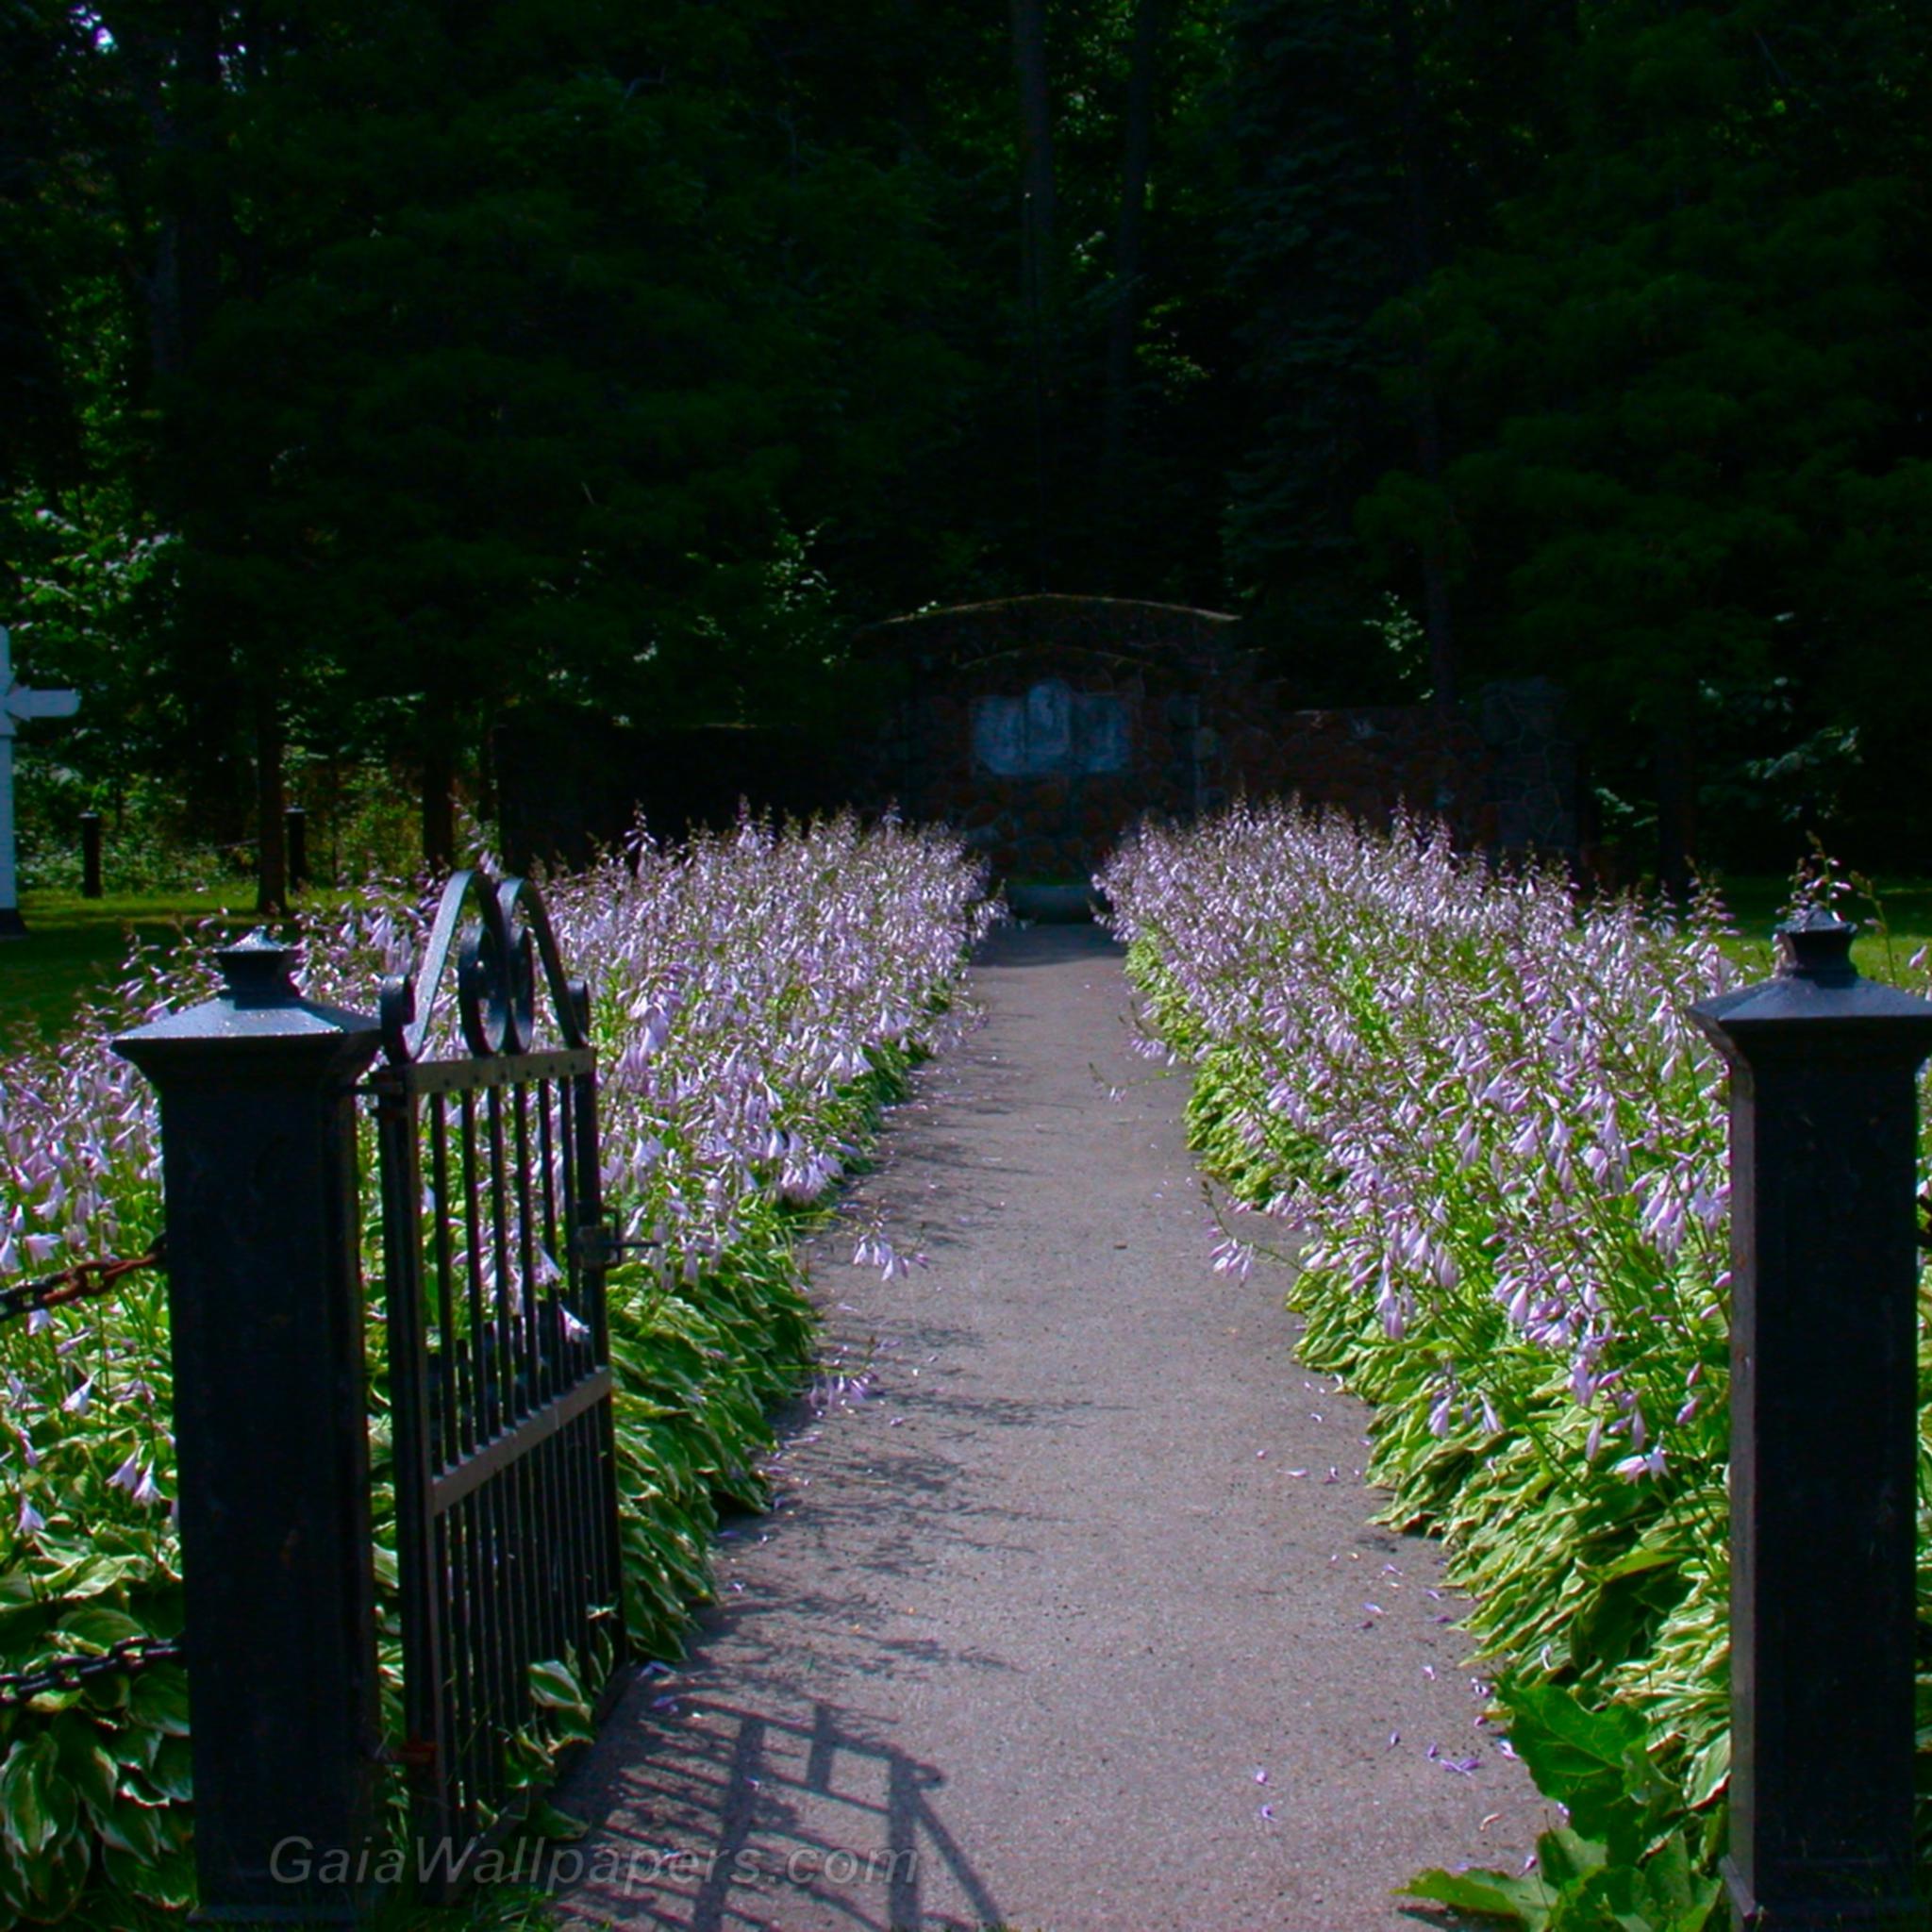 Path lined with Hostas leading to a sacred place - Free desktop wallpapers